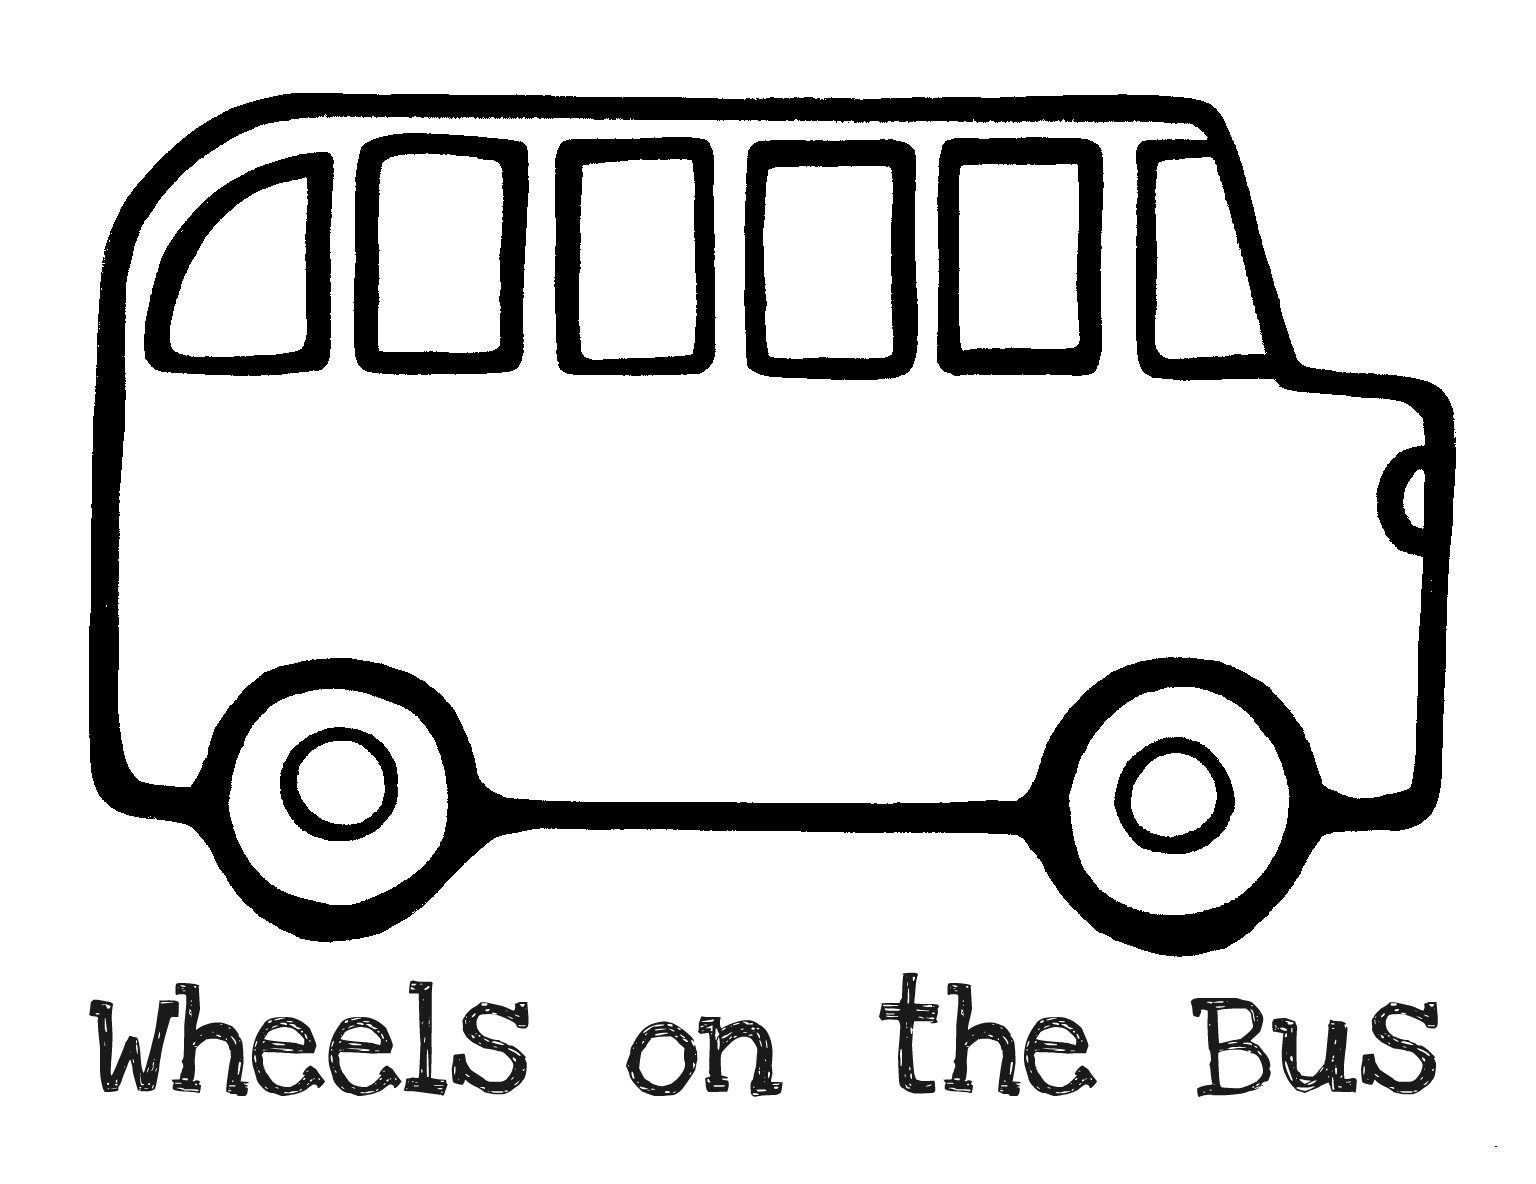 School bus  black and white bus school outline clipart